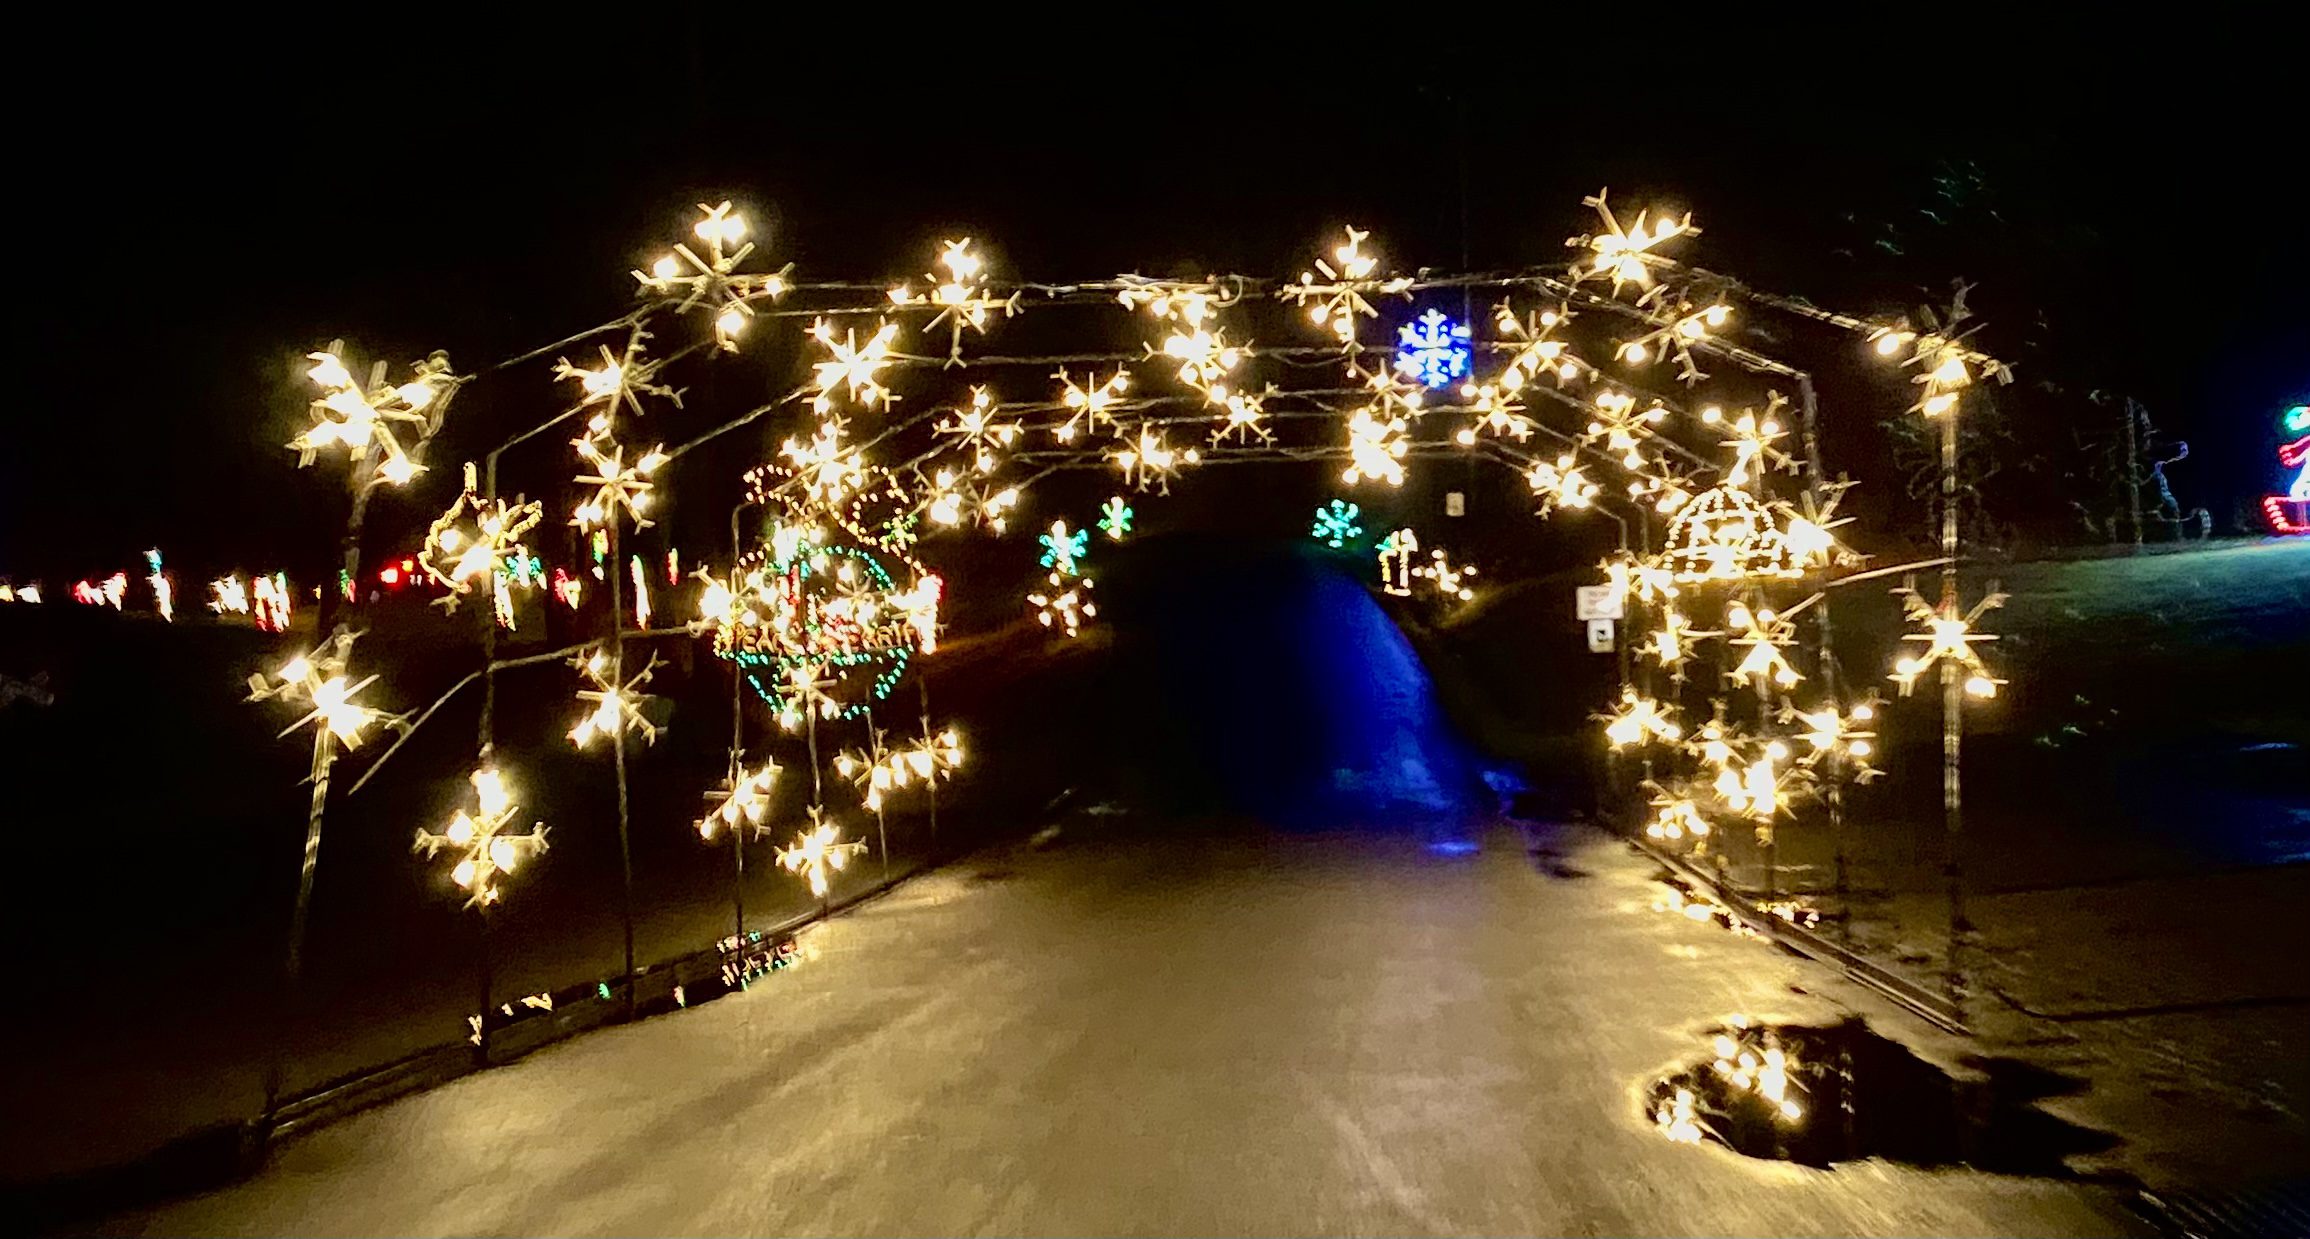 Bluefield's 'Holiday of Lights' is an annual wonder